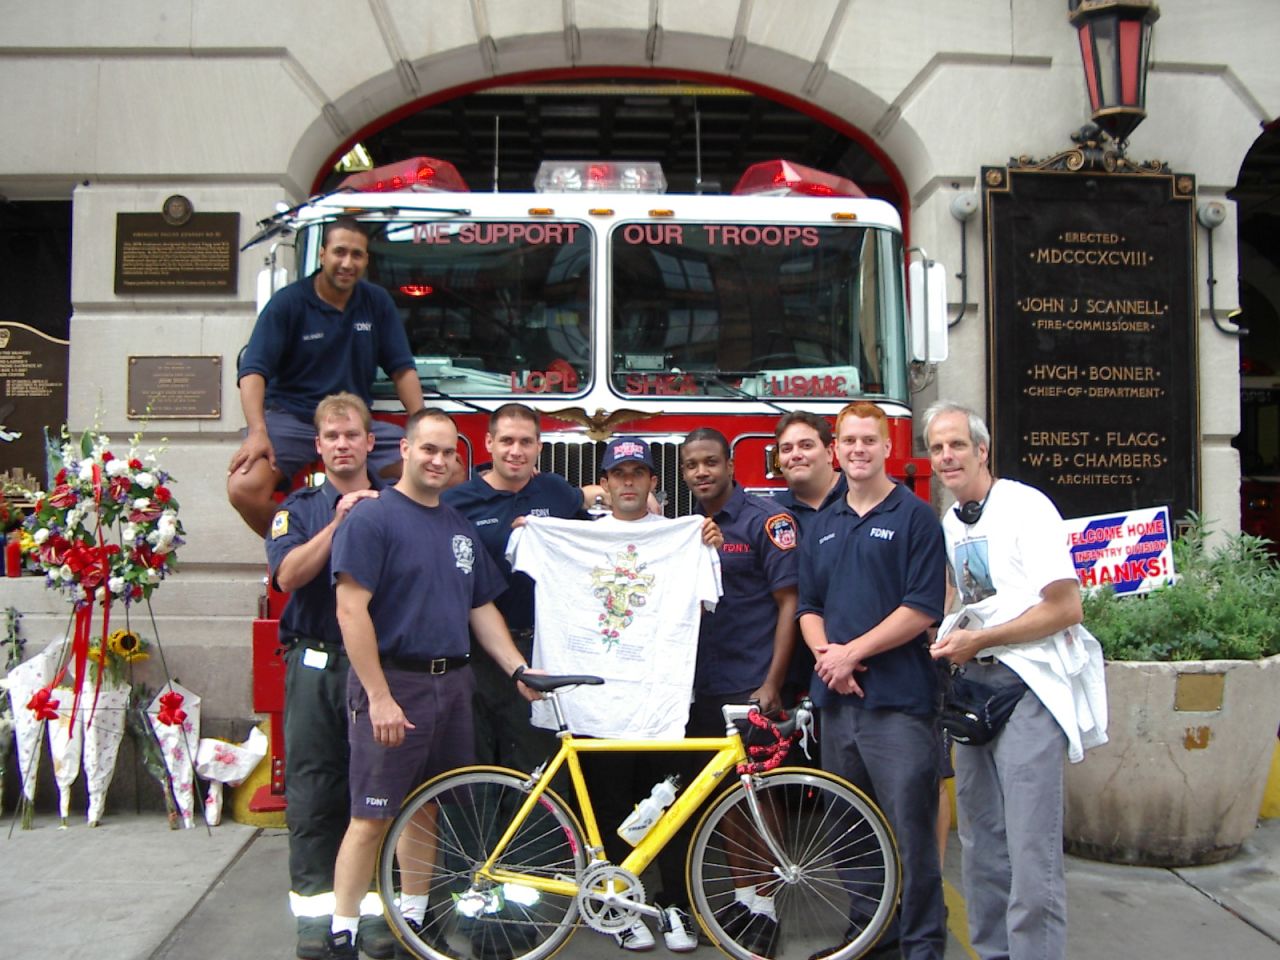 Baluchi donated a bicycle to the firefighters of Engine 33 Ladder 9, who suffered tragic losses as a result of the 9/11 terror attacks on the World Trade Center.